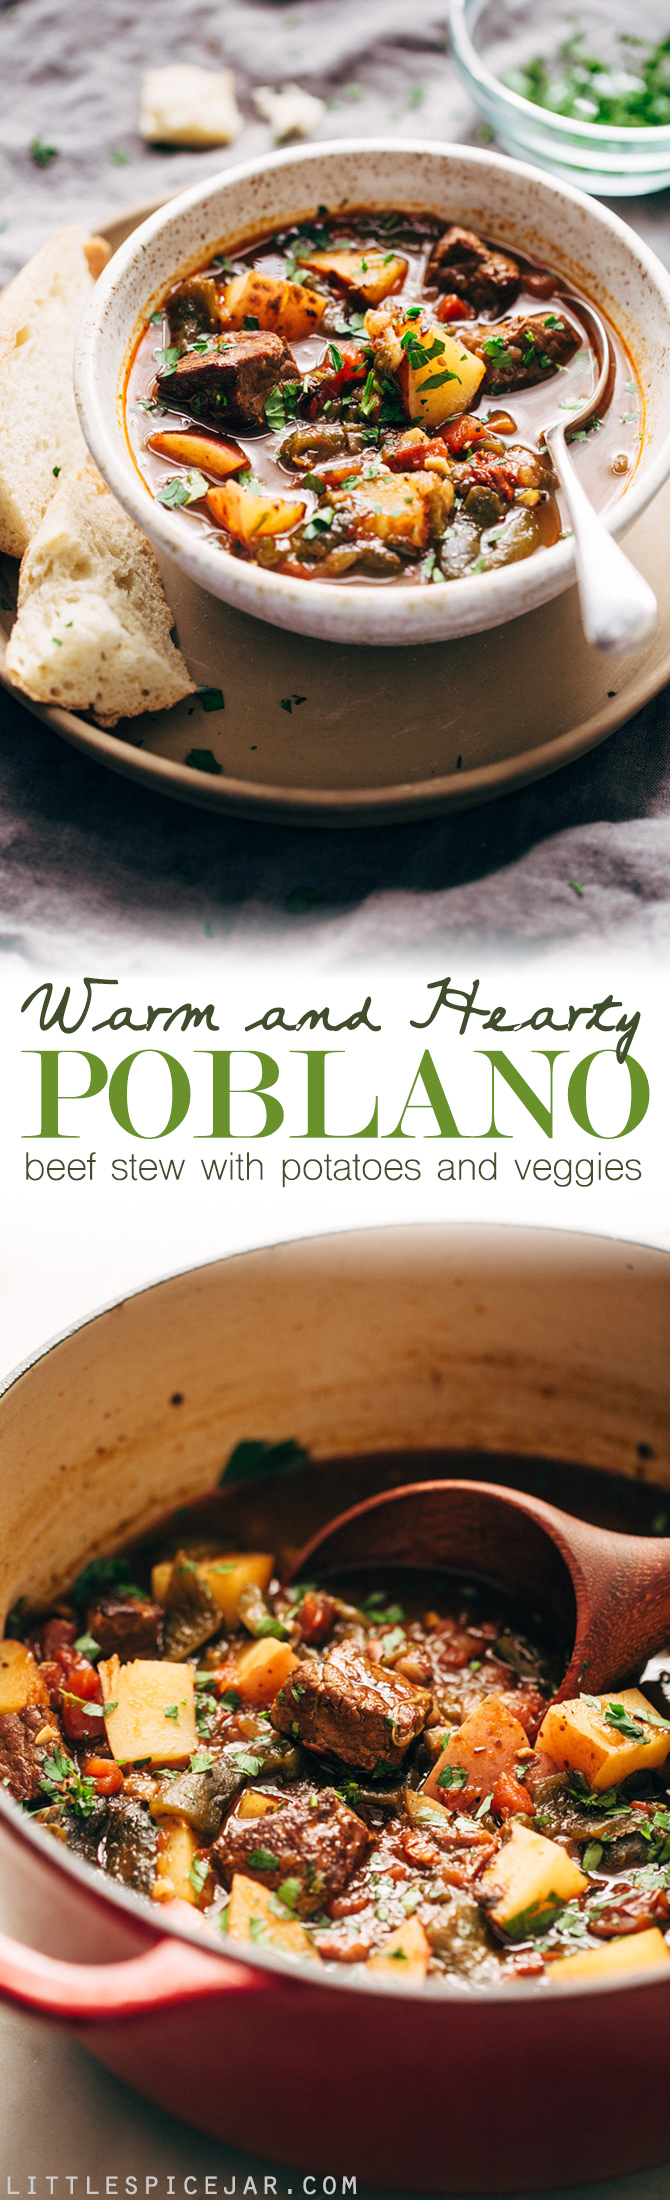 Hearty Poblano Beef Stew - a beef stew that's been amped up with roasted poblanos and chipotle peppers! So good you'll forget about your old stew recipe! #beefstew #stew #poblanobeefstew | Littlespicejar.com